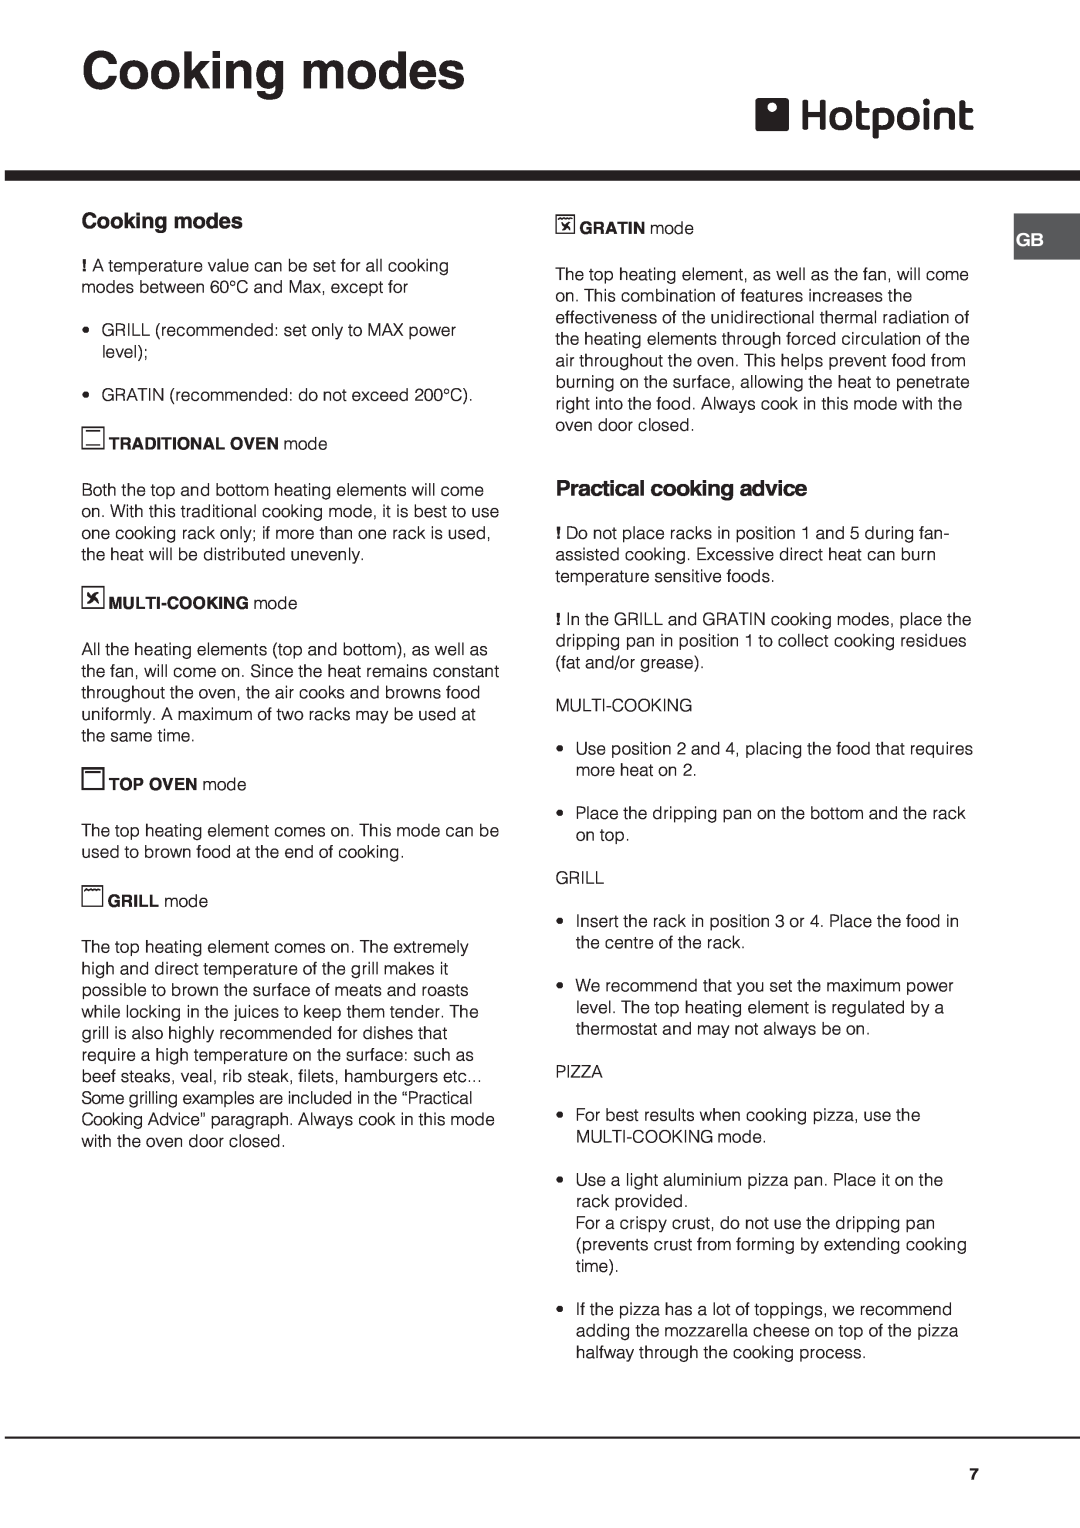 Hotpoint SY56X/1, SY10X/1 manual Cooking modes, Practical cooking advice 